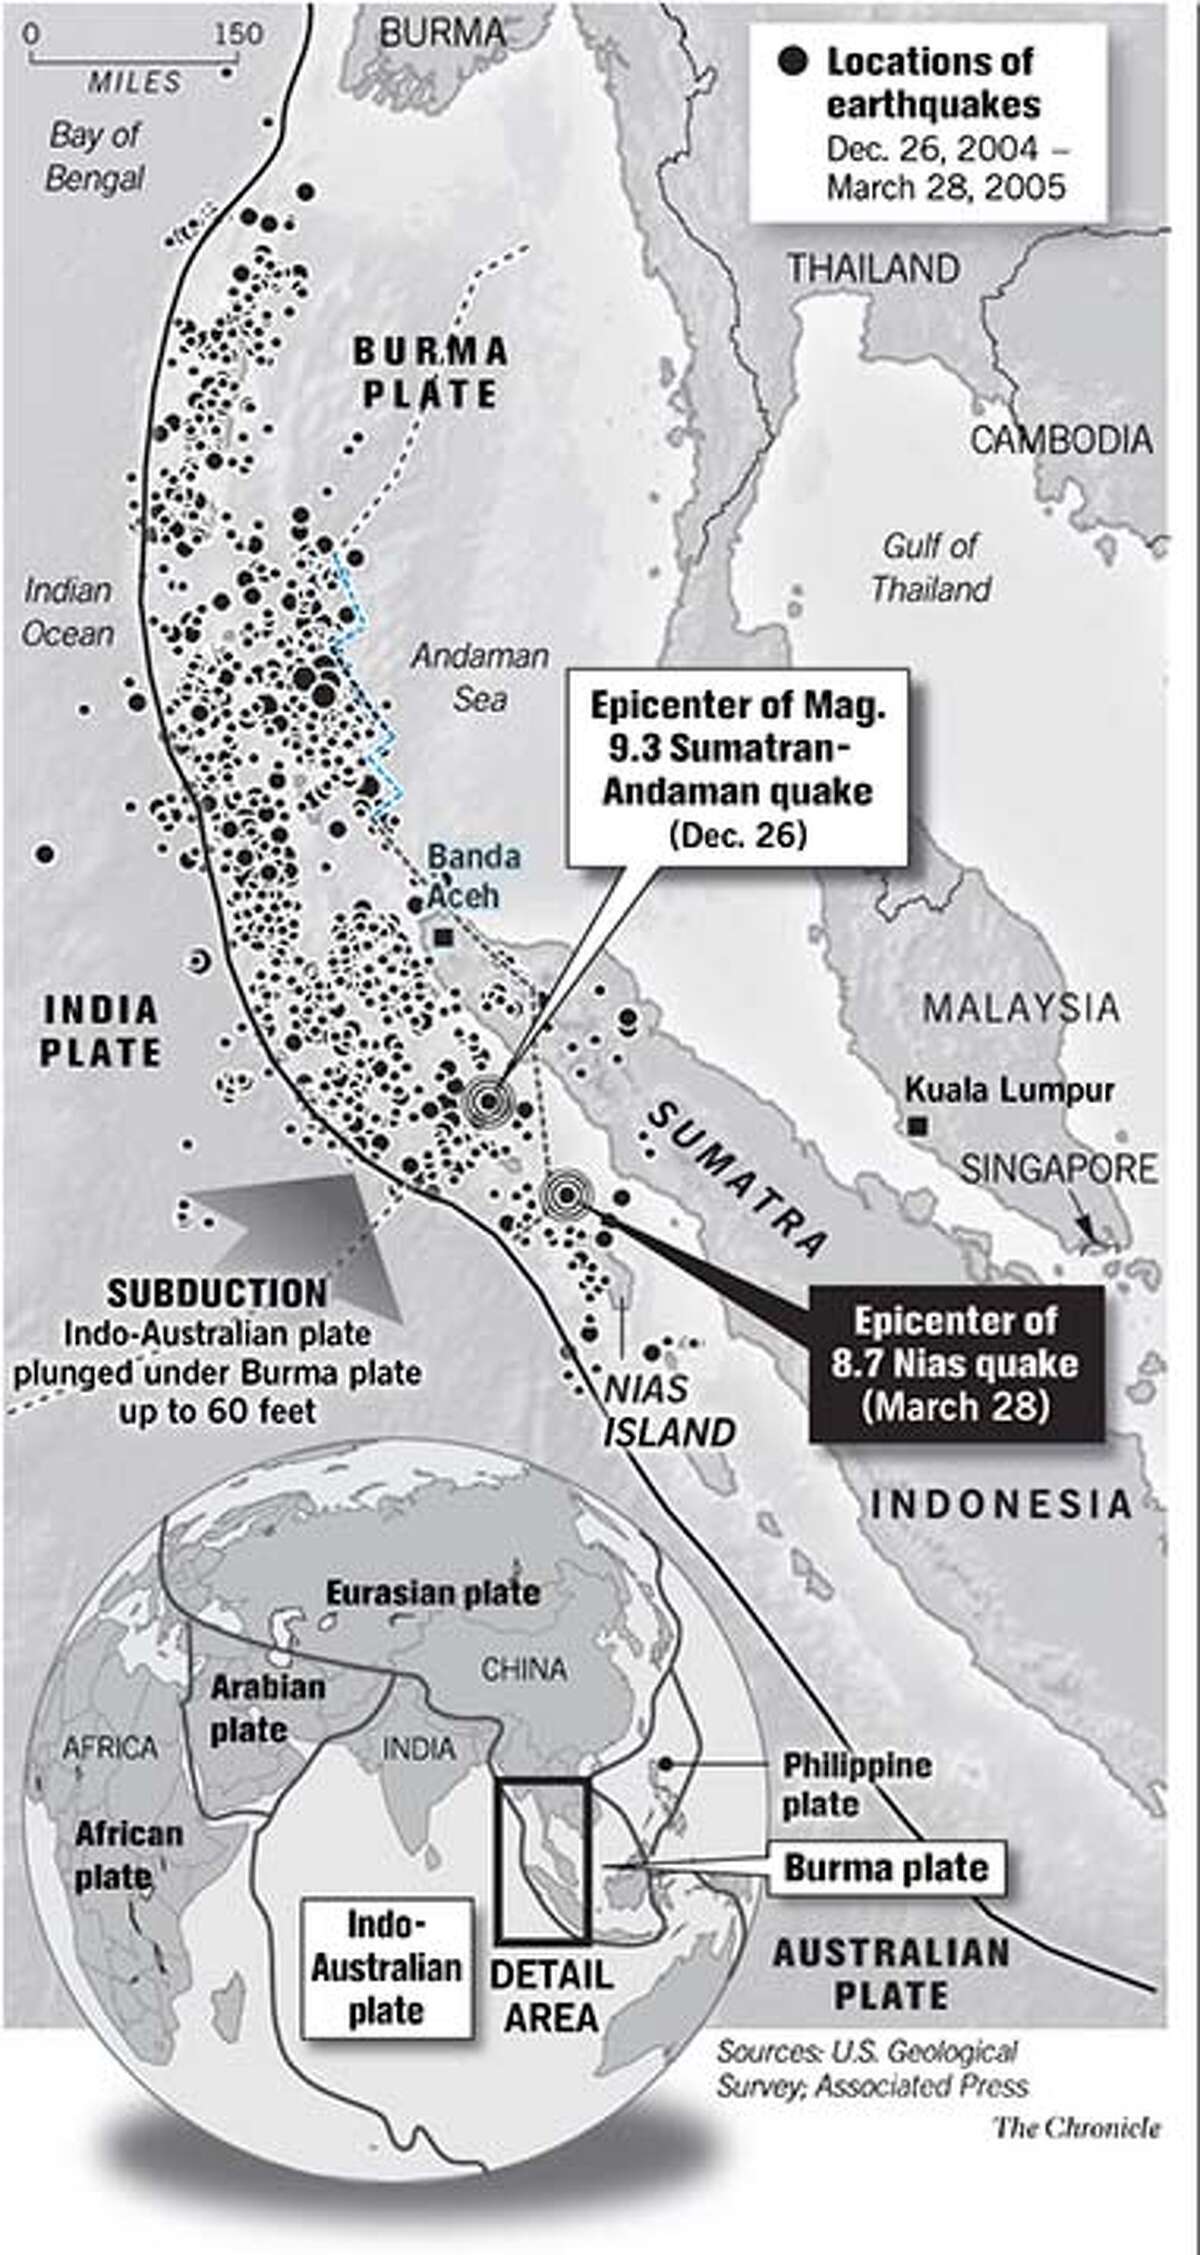 Locations of earthquakes from December 26, 2004 to March 28, 2005. Chronicle Graphic